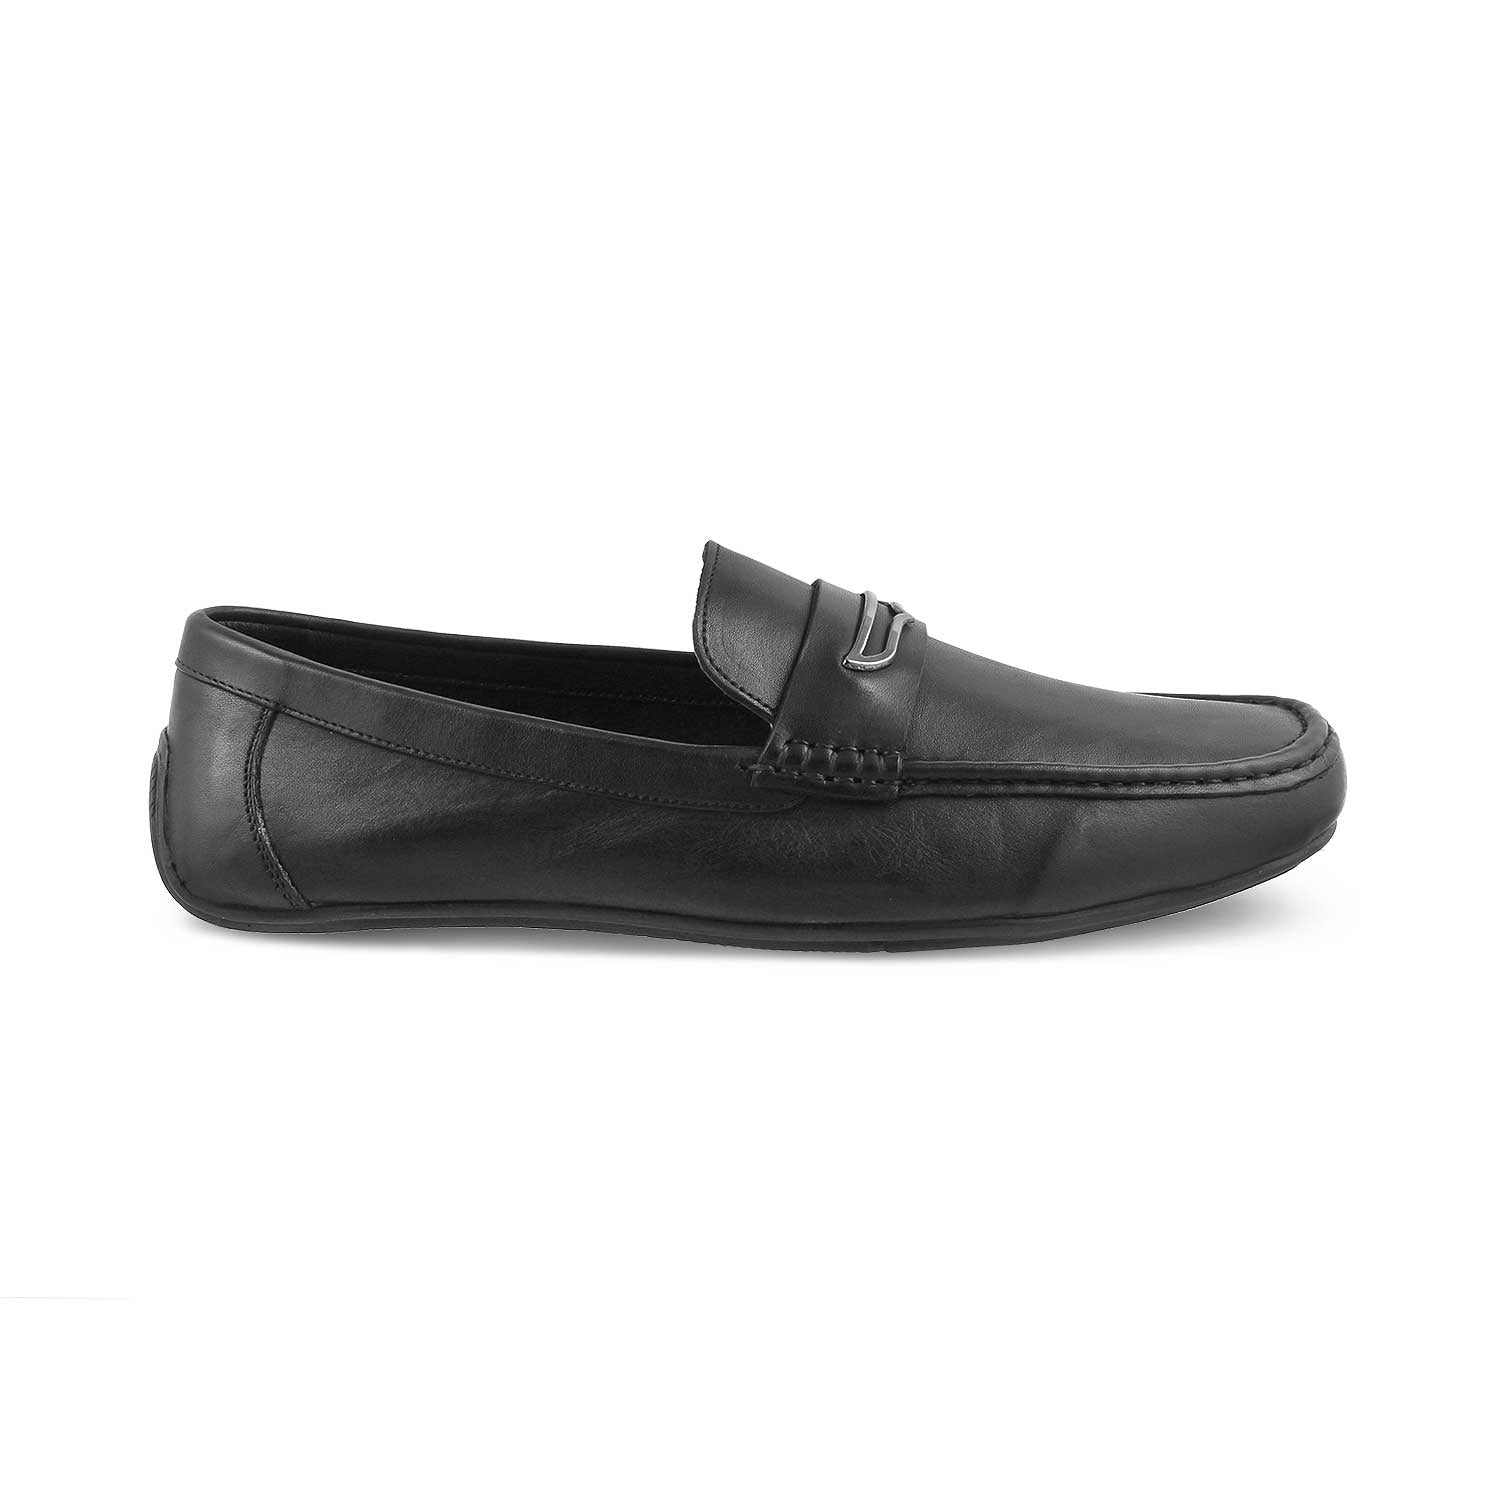 Tresmode-The Yodry Black Men's Leather Driving Loafers Tresmode-Tresmode